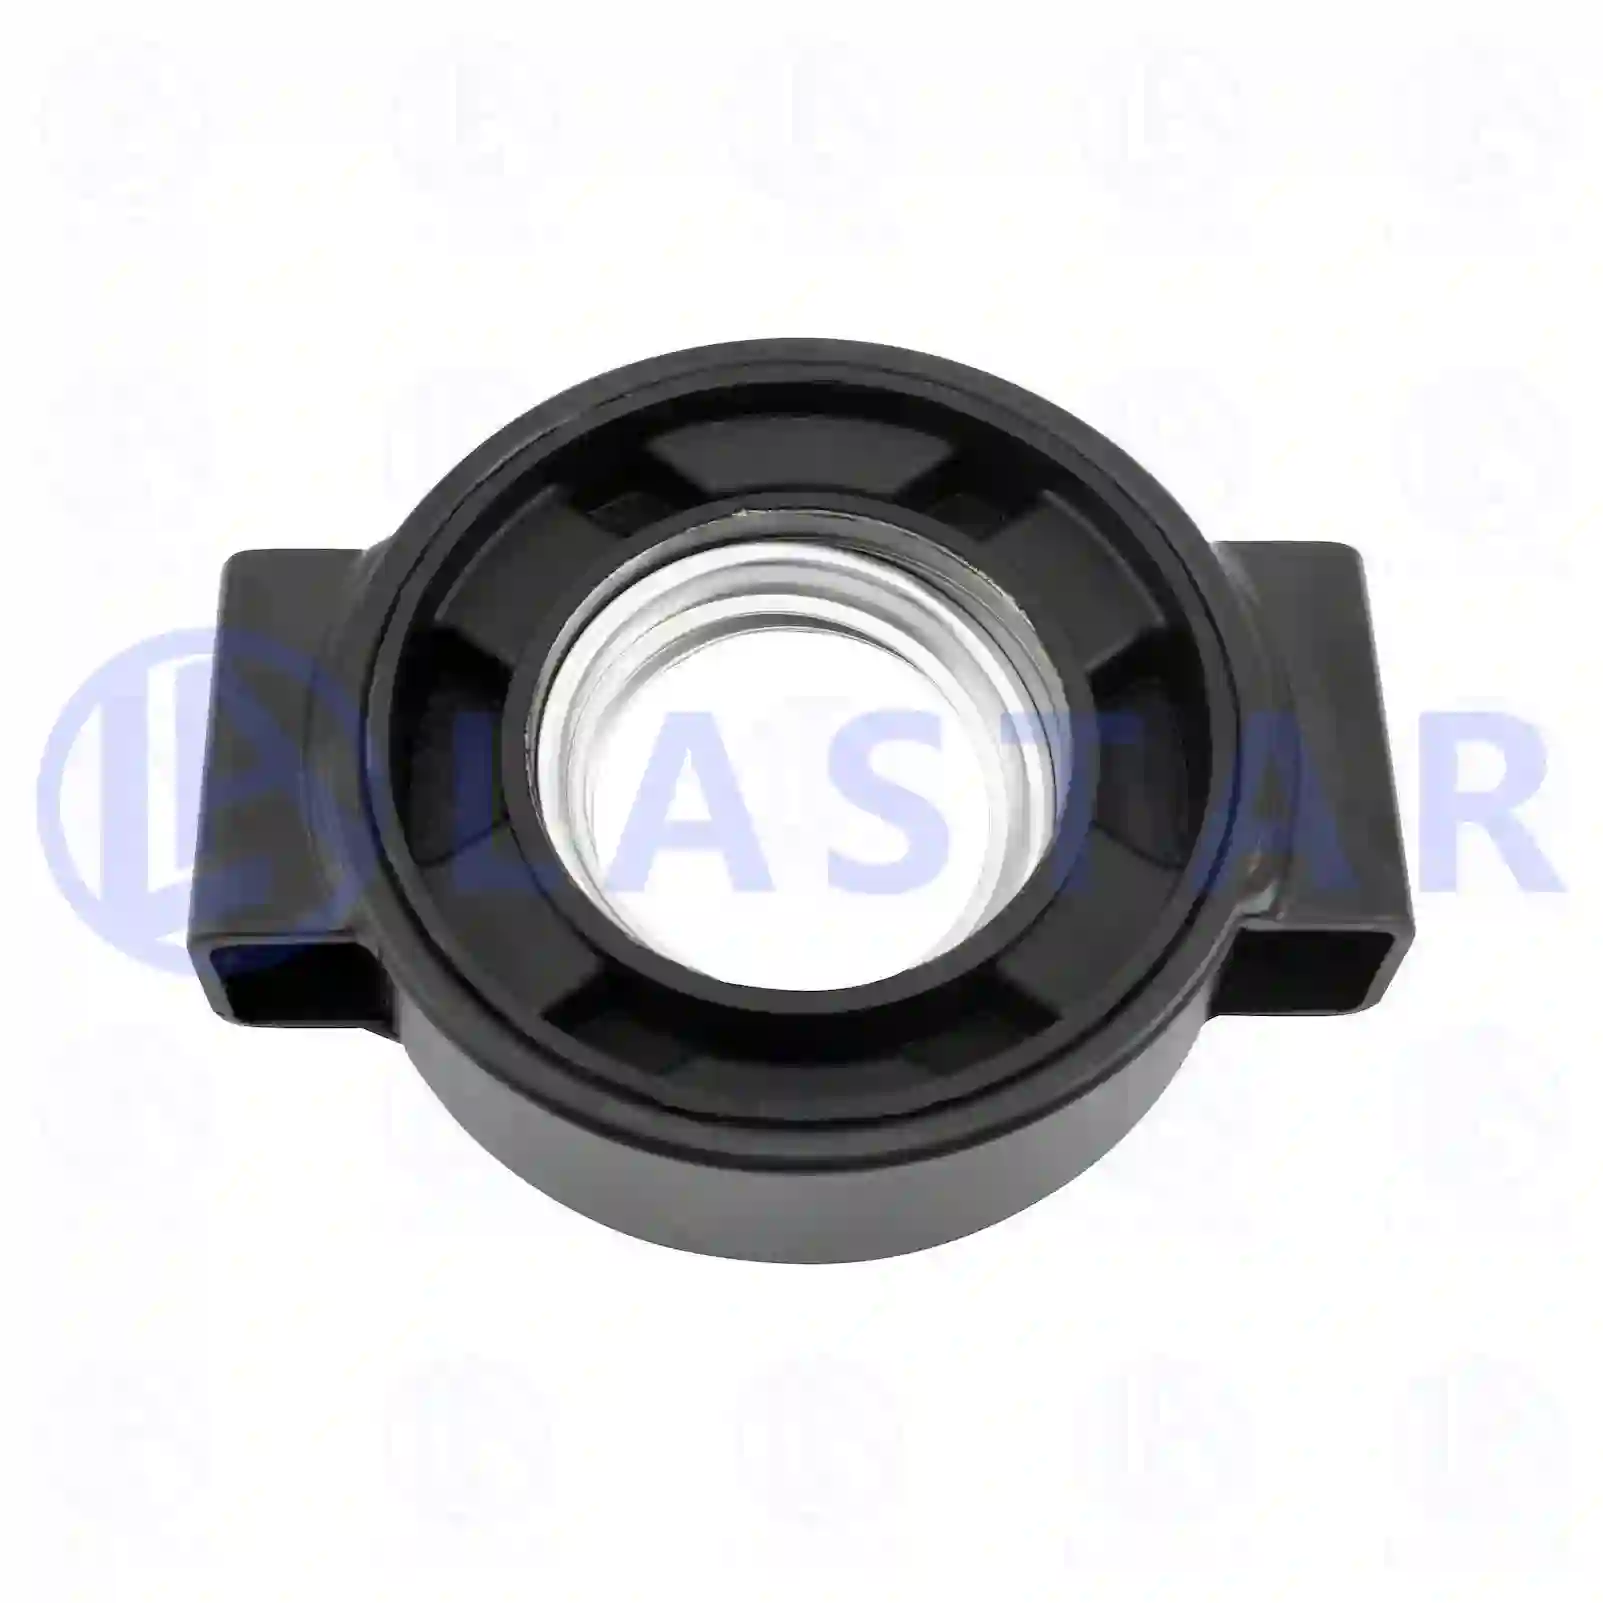 Center bearing, without ball bearing, 77734148, 3954100022, 6204100010, 6554100122 ||  77734148 Lastar Spare Part | Truck Spare Parts, Auotomotive Spare Parts Center bearing, without ball bearing, 77734148, 3954100022, 6204100010, 6554100122 ||  77734148 Lastar Spare Part | Truck Spare Parts, Auotomotive Spare Parts